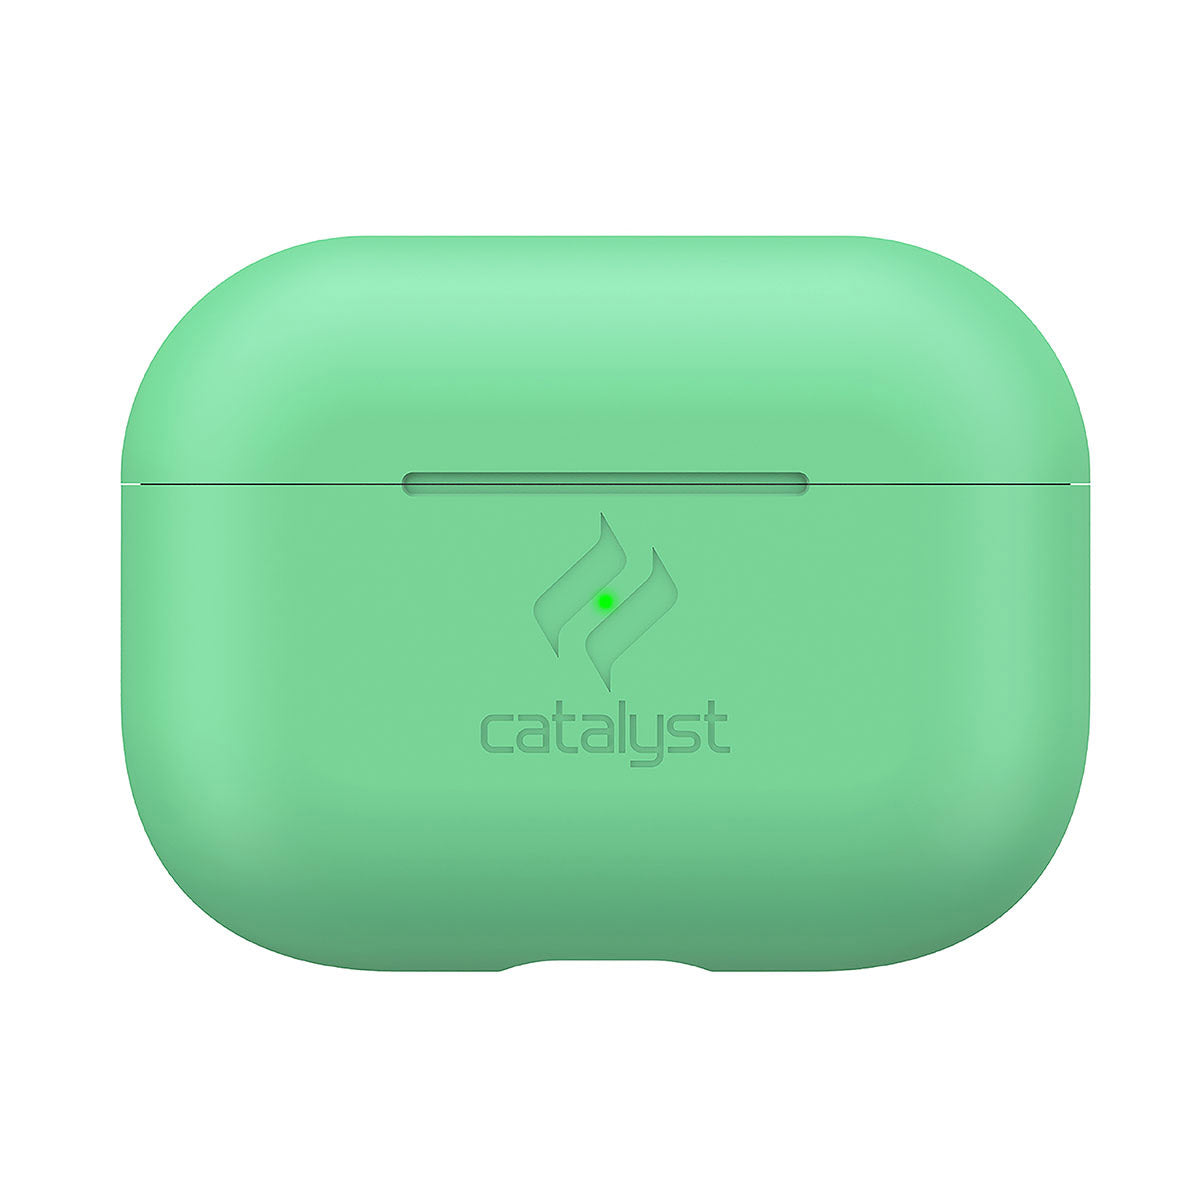  Catalyst airpods pro gen 2/1 slim case showing front view of the case in mint green colorway